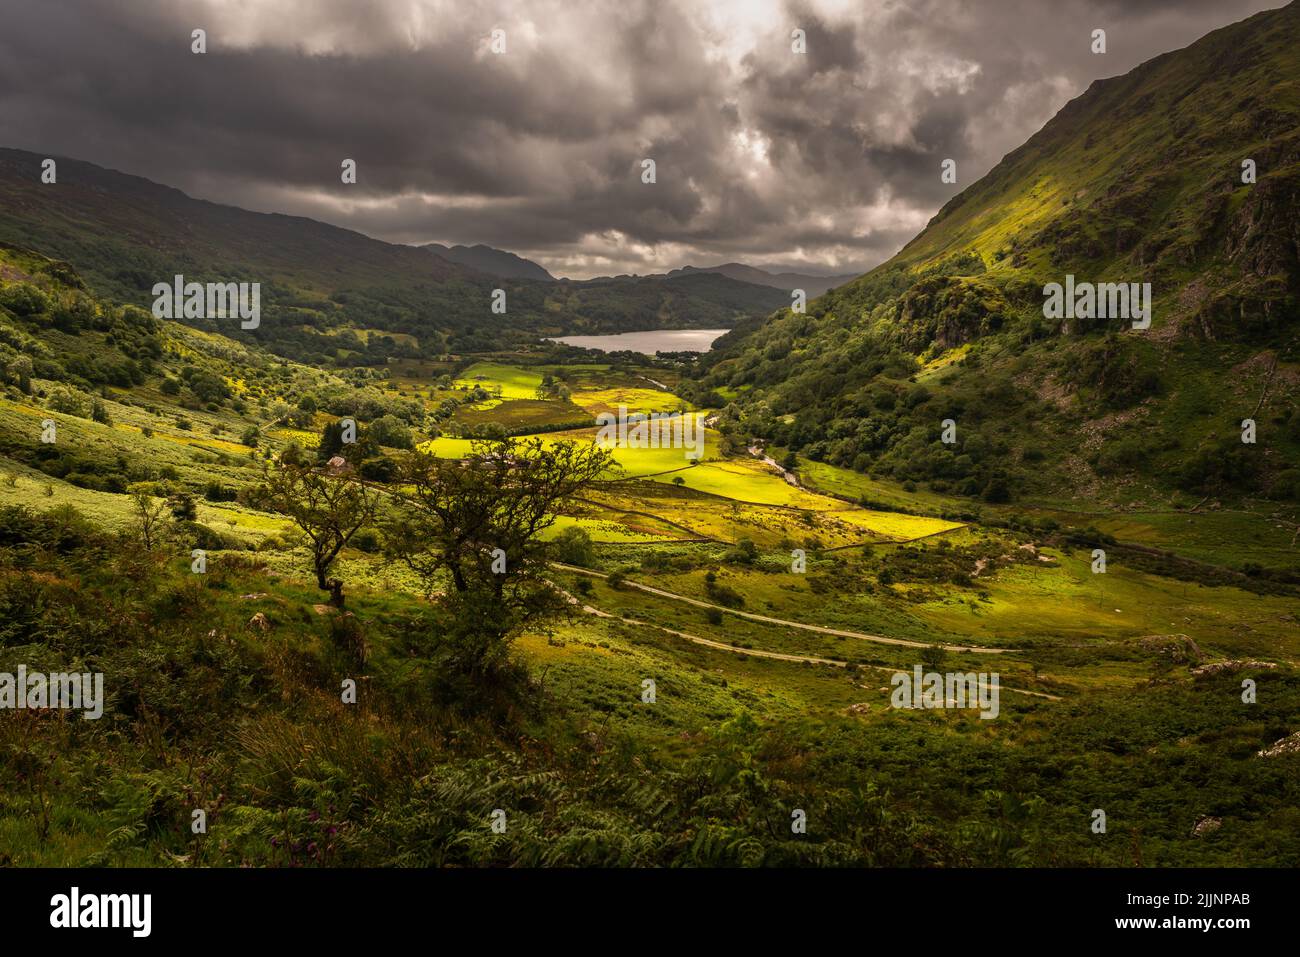 Nant Gwynant Valley landscape on a stormy day, Snowdonia National Park, Wales, UK Stock Photo